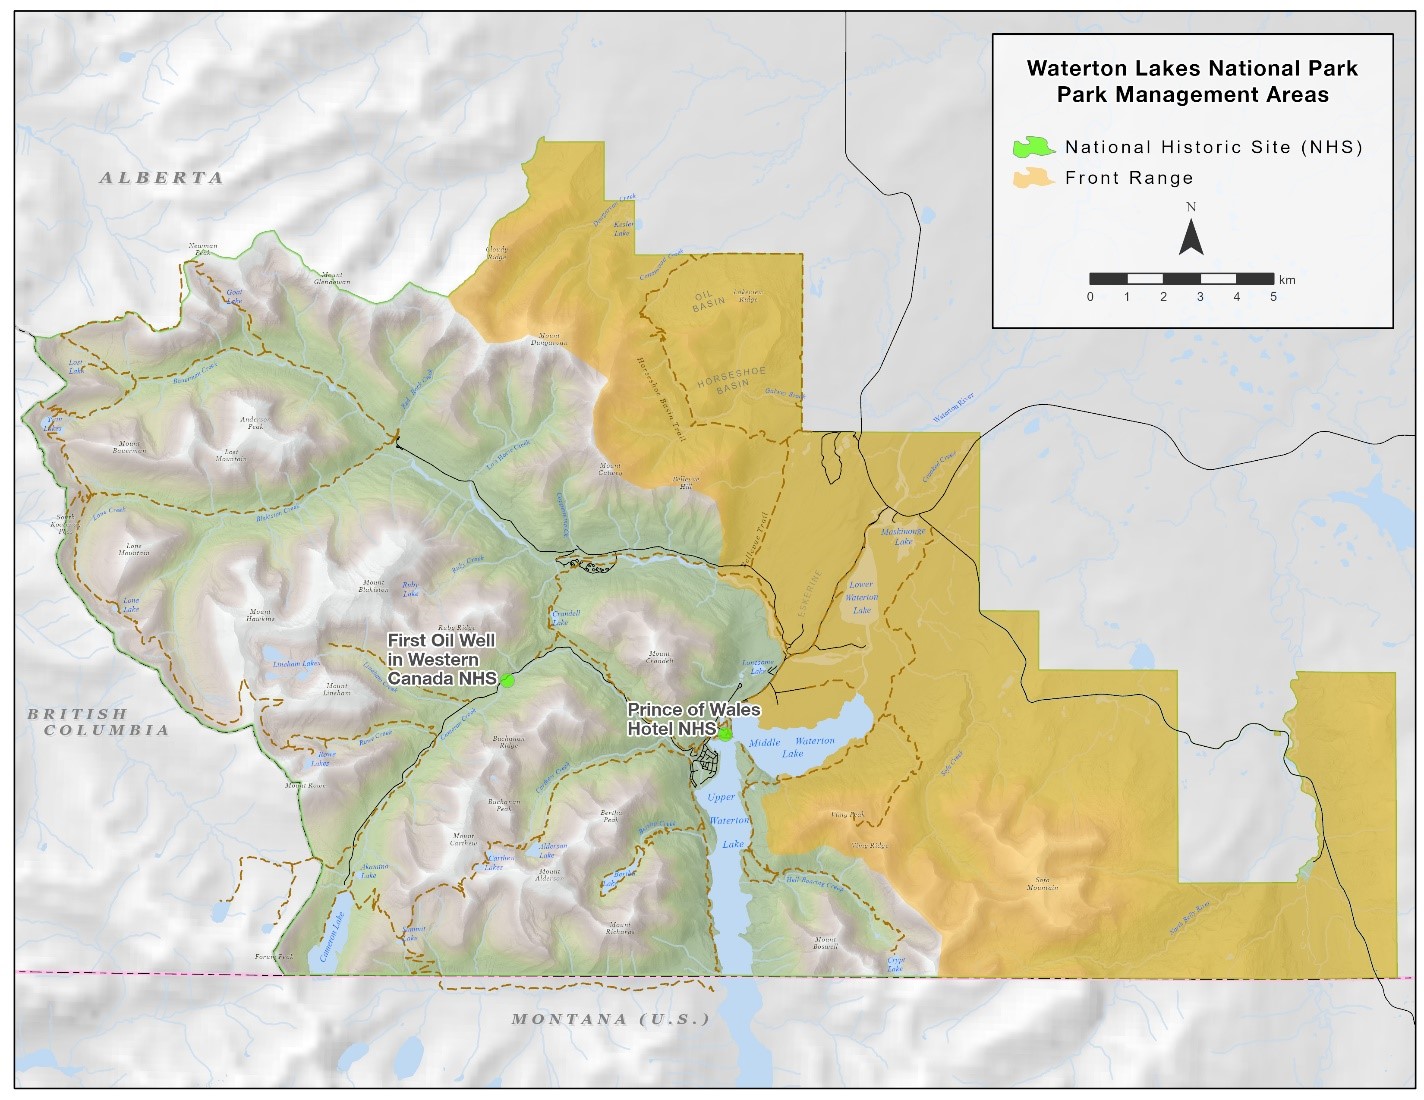 Map 3: Waterton Lakes National Park Management Areas